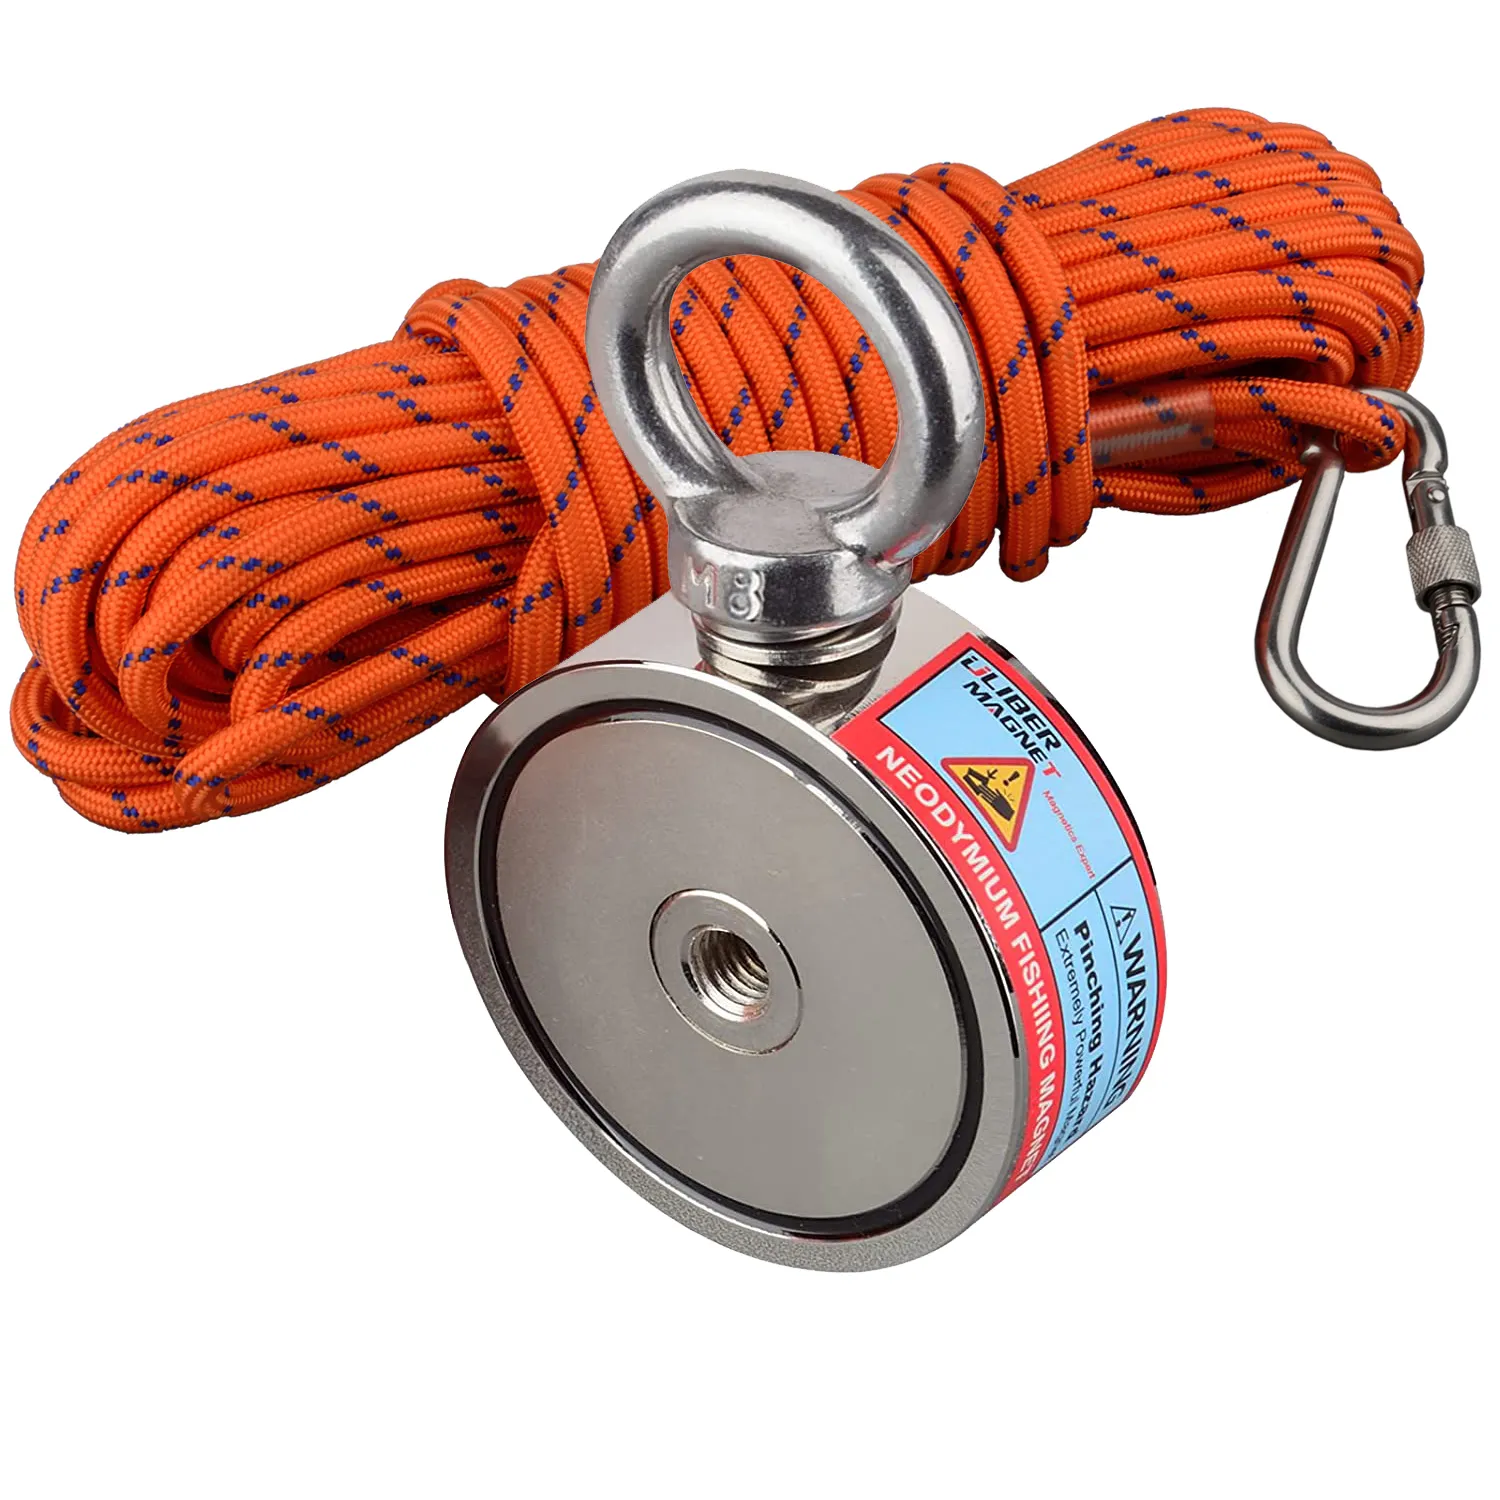 Strong Neodymium Double Side Magnet Fishing Set 320KG-500KG Combined Super Power Salvage Detecting Rare Earth Searching Rope